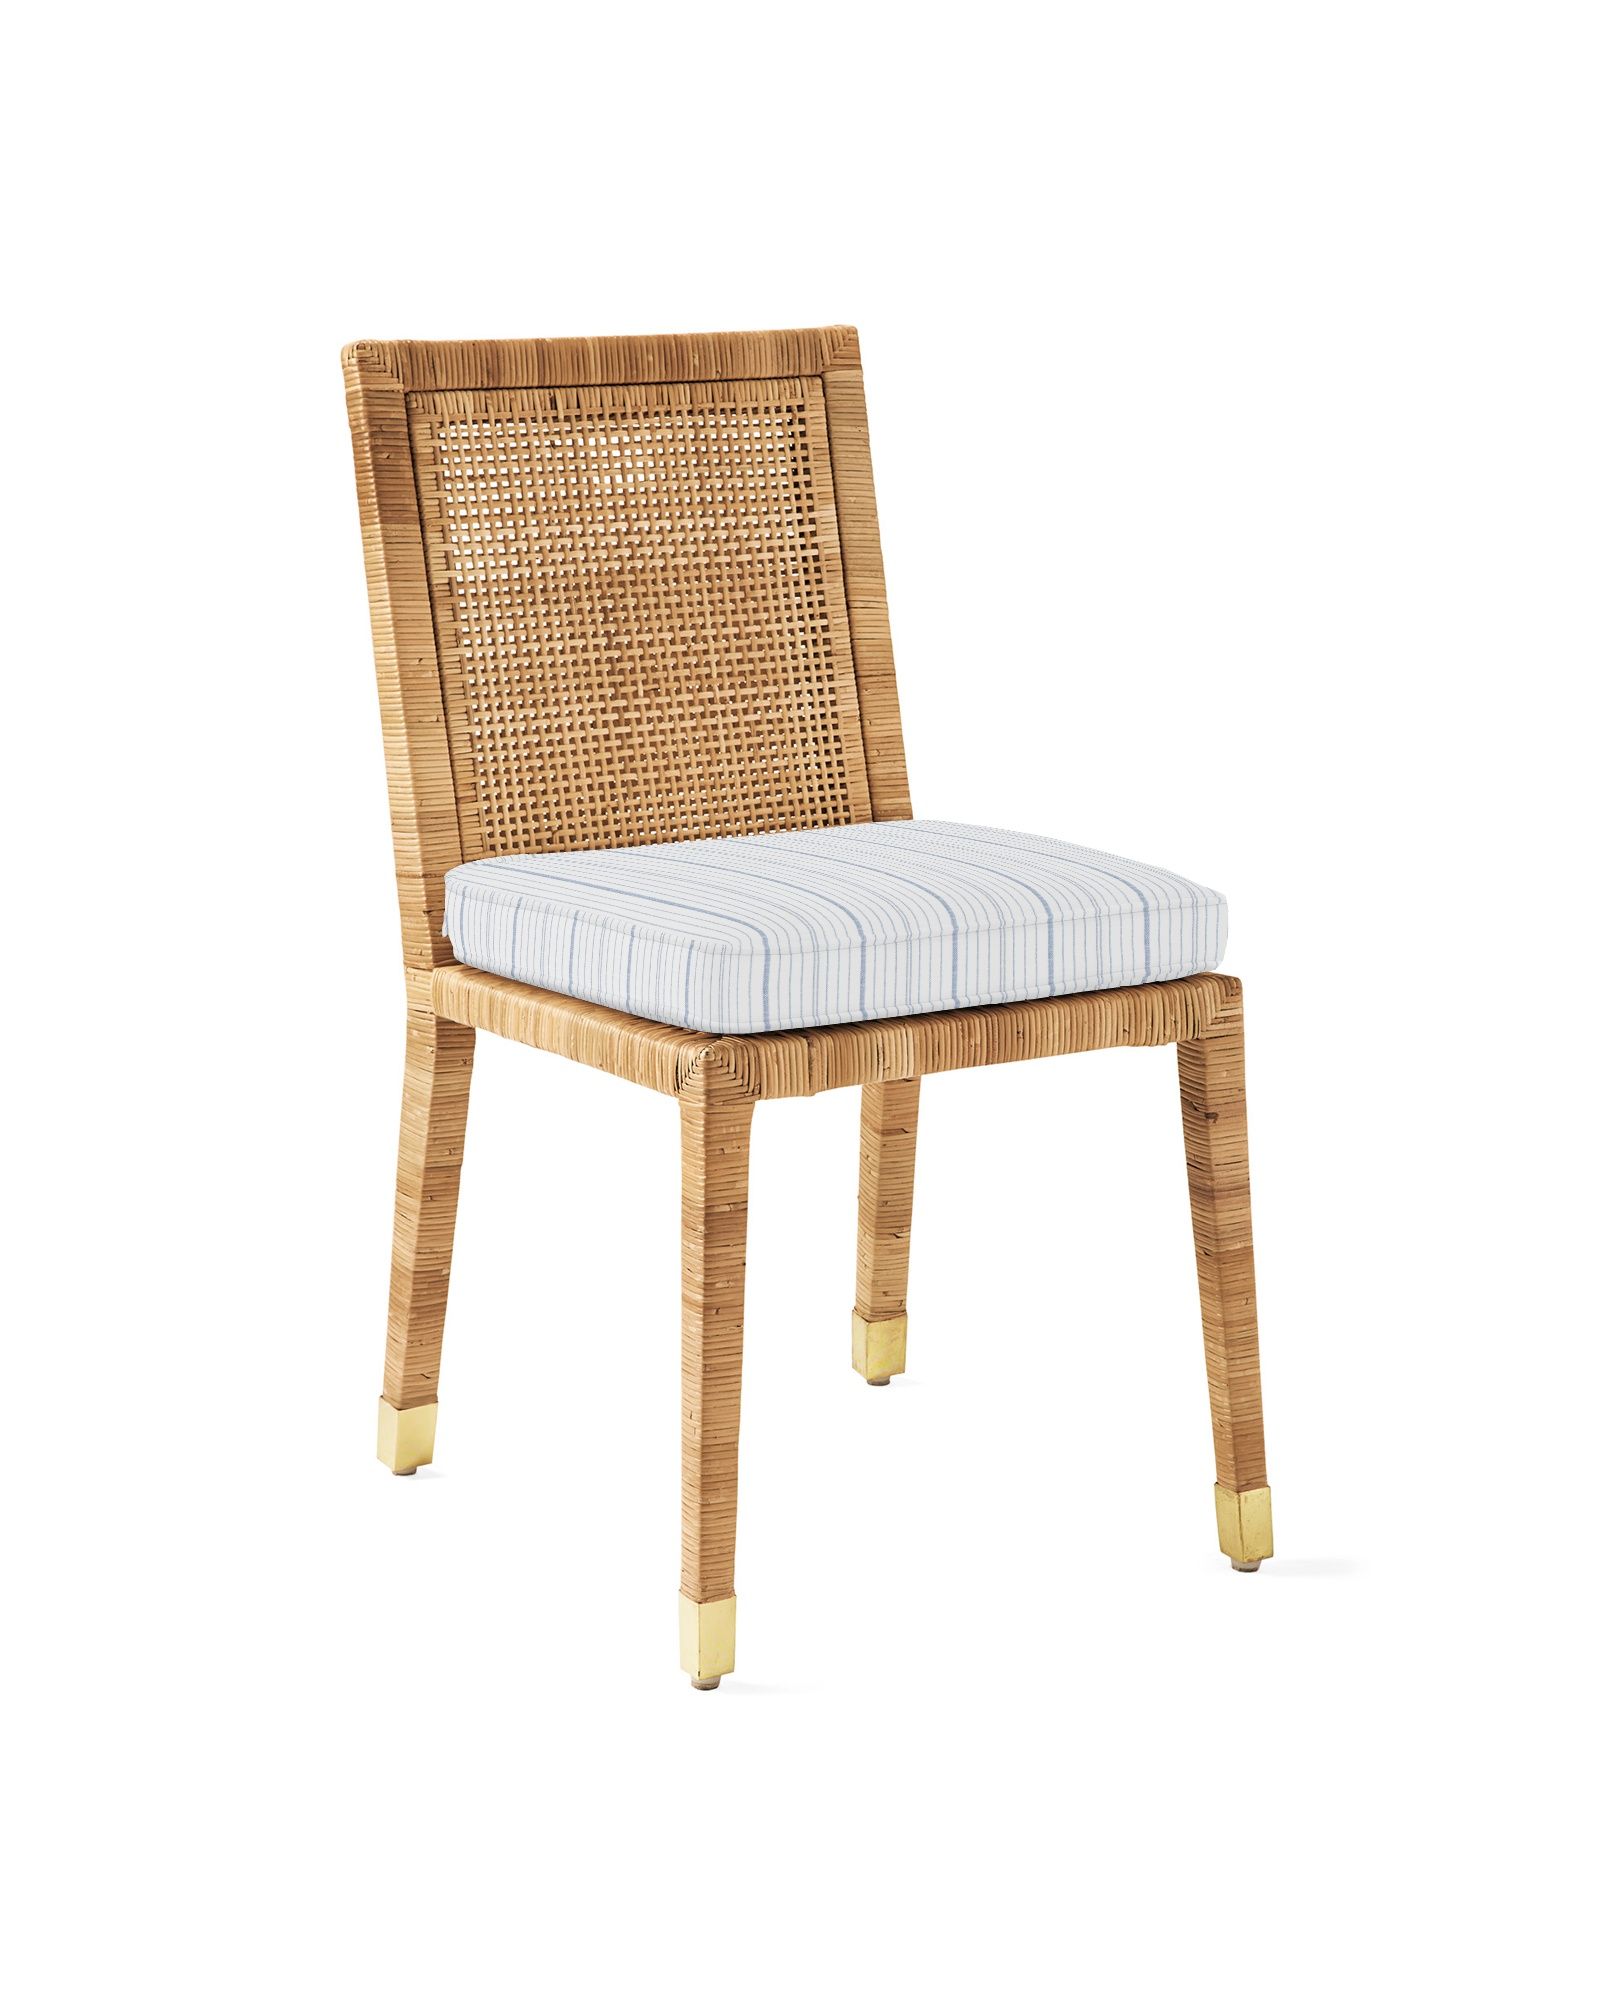 Balboa Side Chair | Serena and Lily